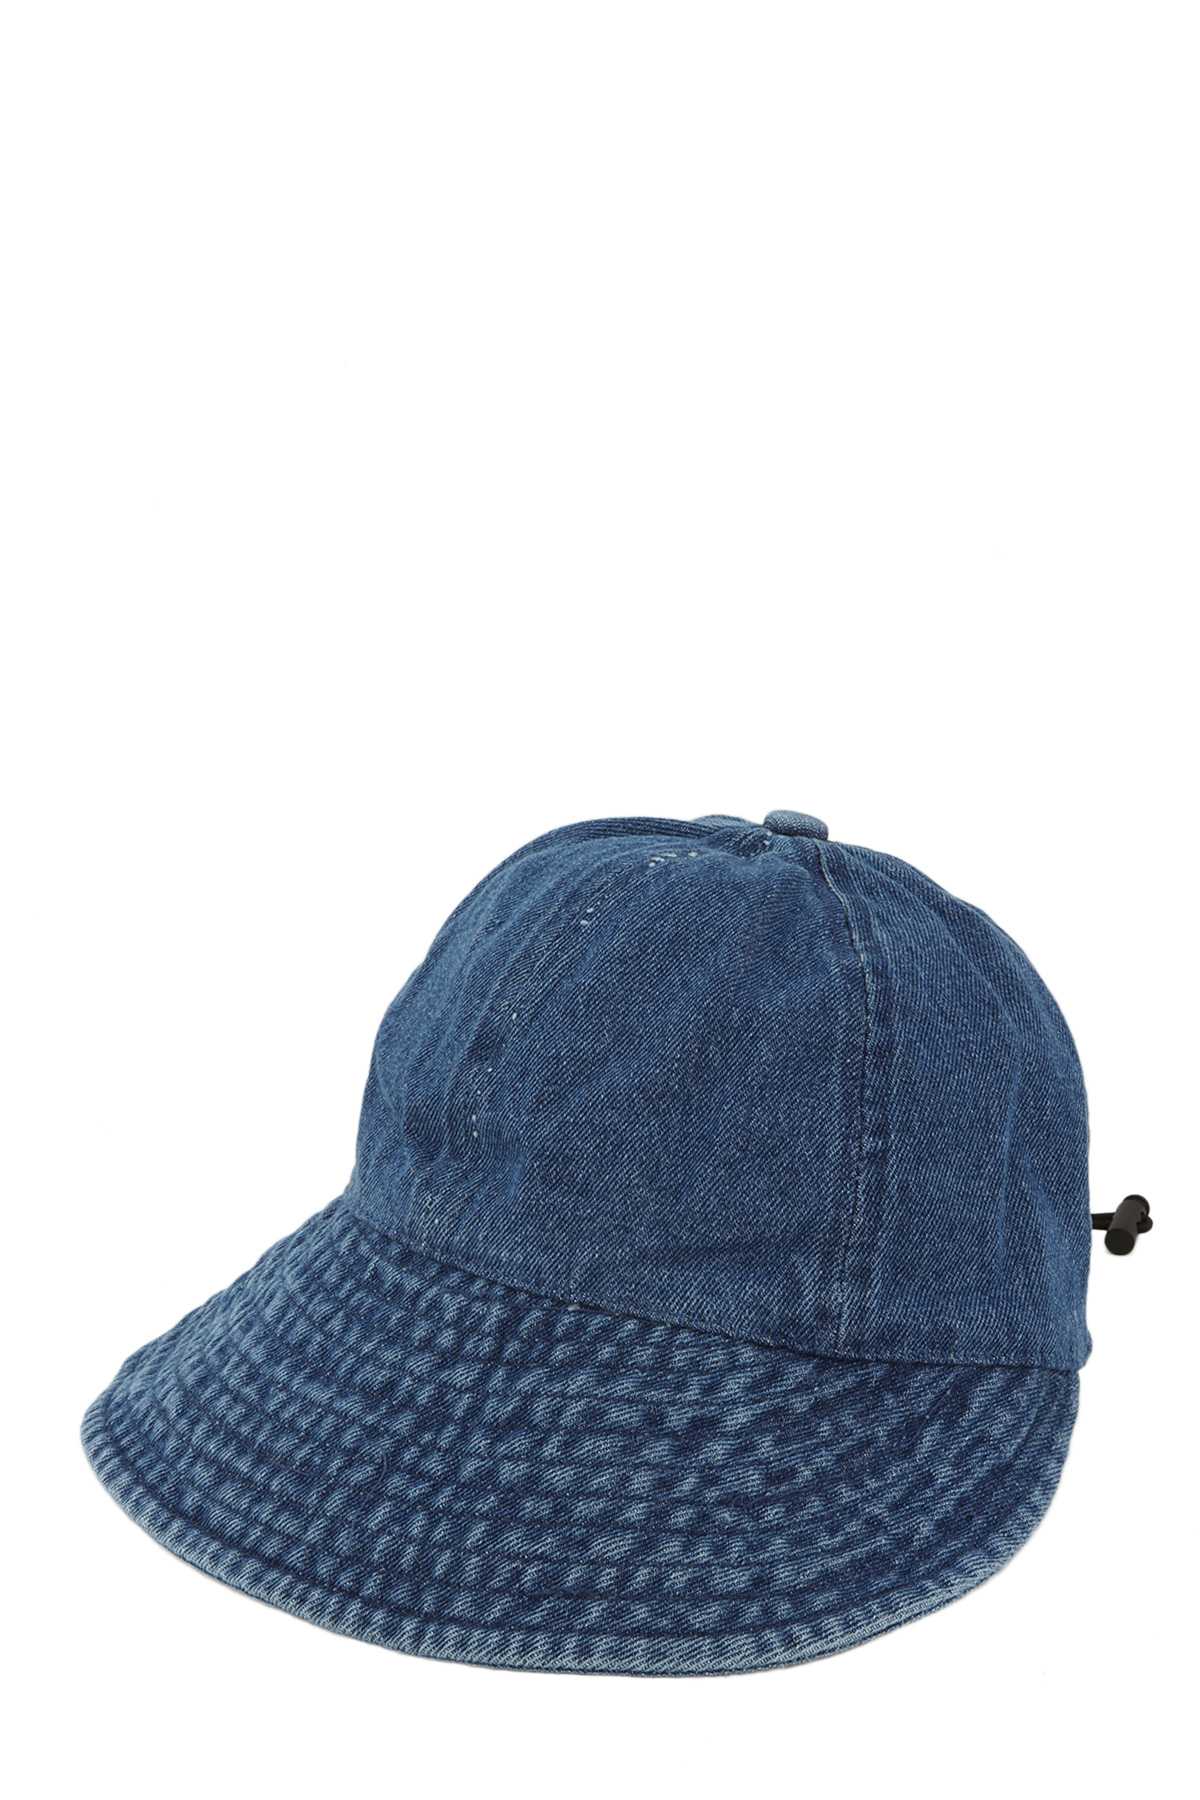 Denim Bucket with Rubber band Hat